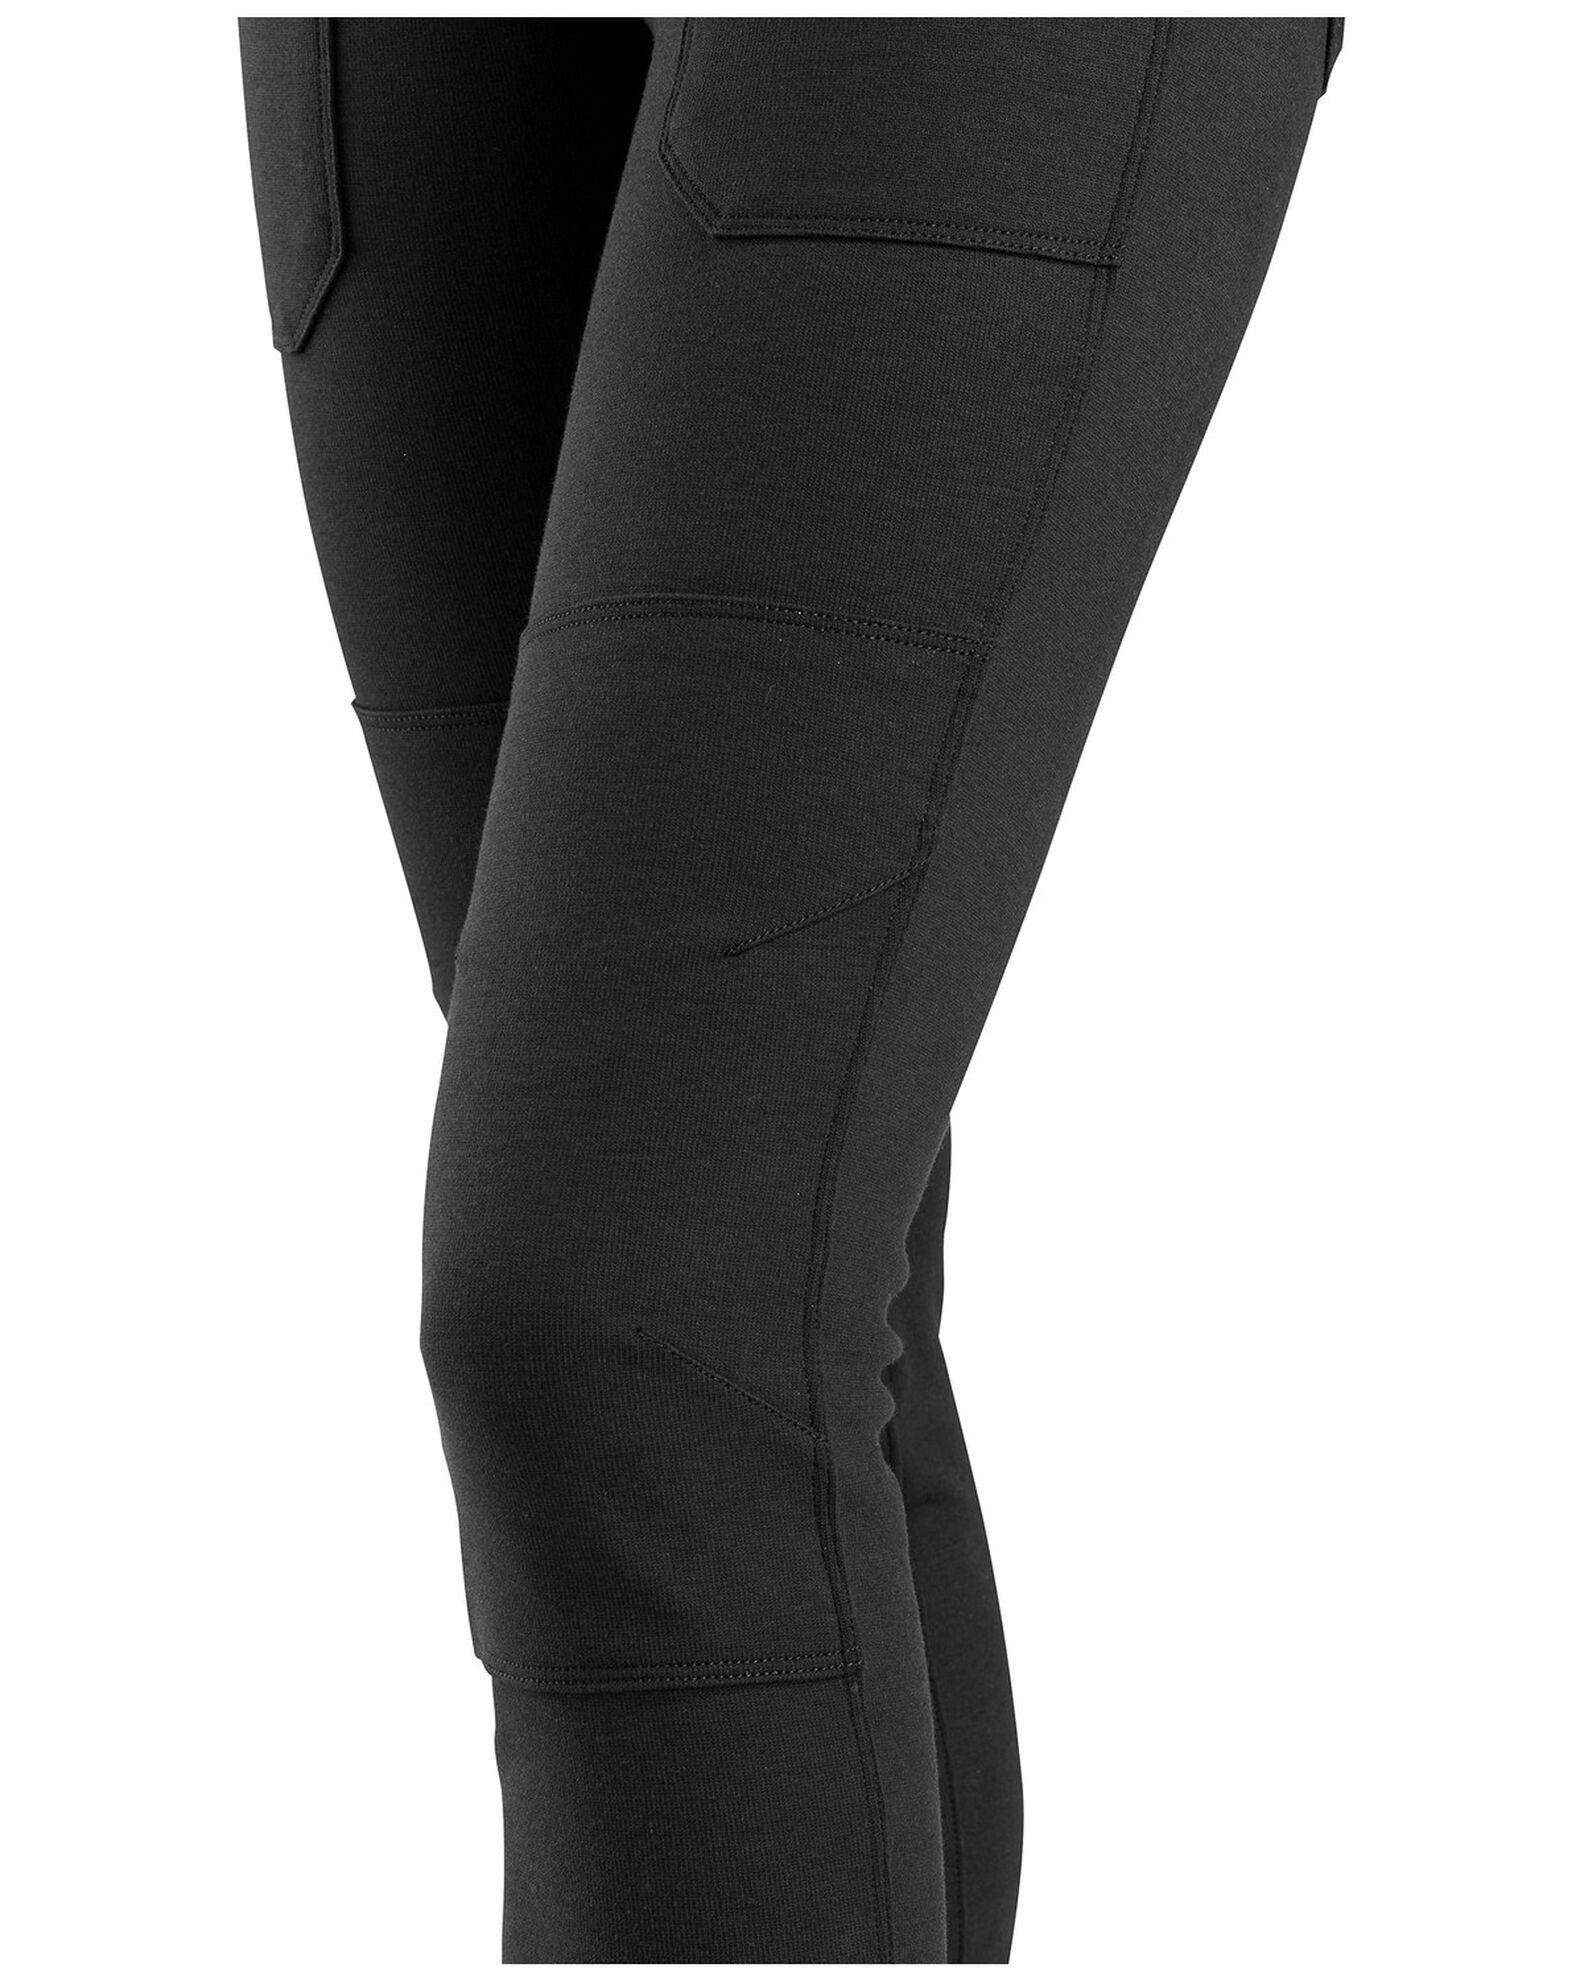 Carhartt Women's FR Force Fitted Midweight Utility Leggings